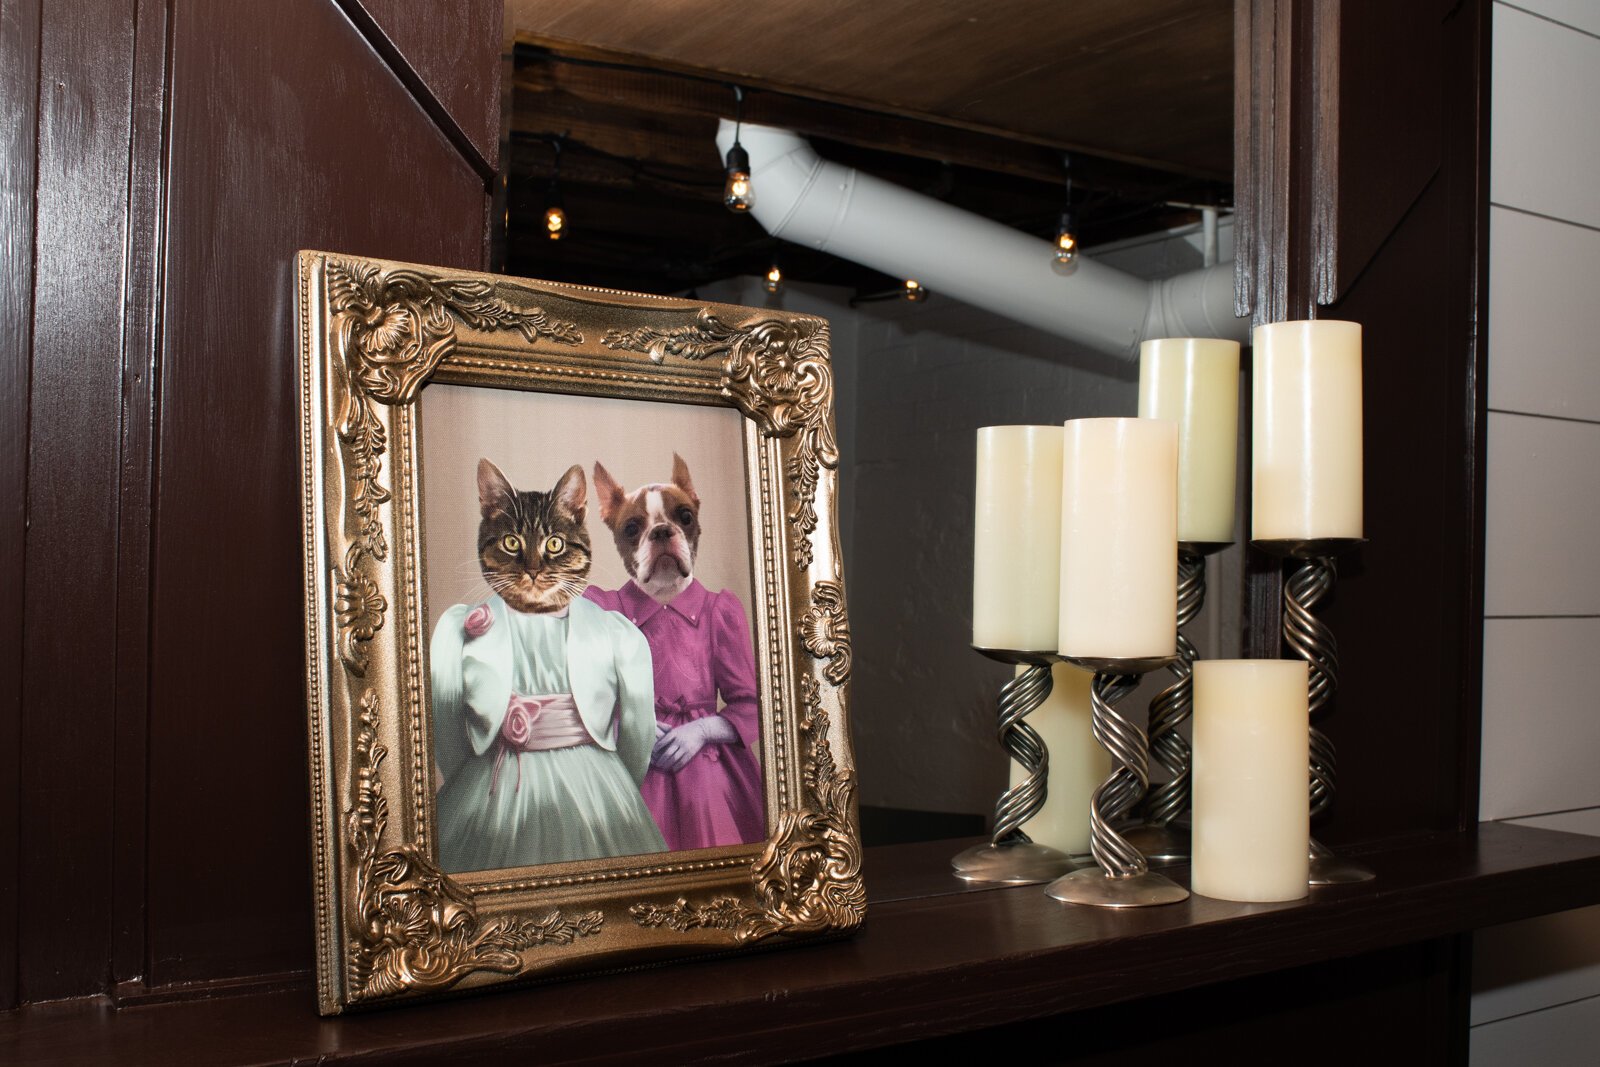 Mantle decor in Kevin Christon's speakeasy style bar space.